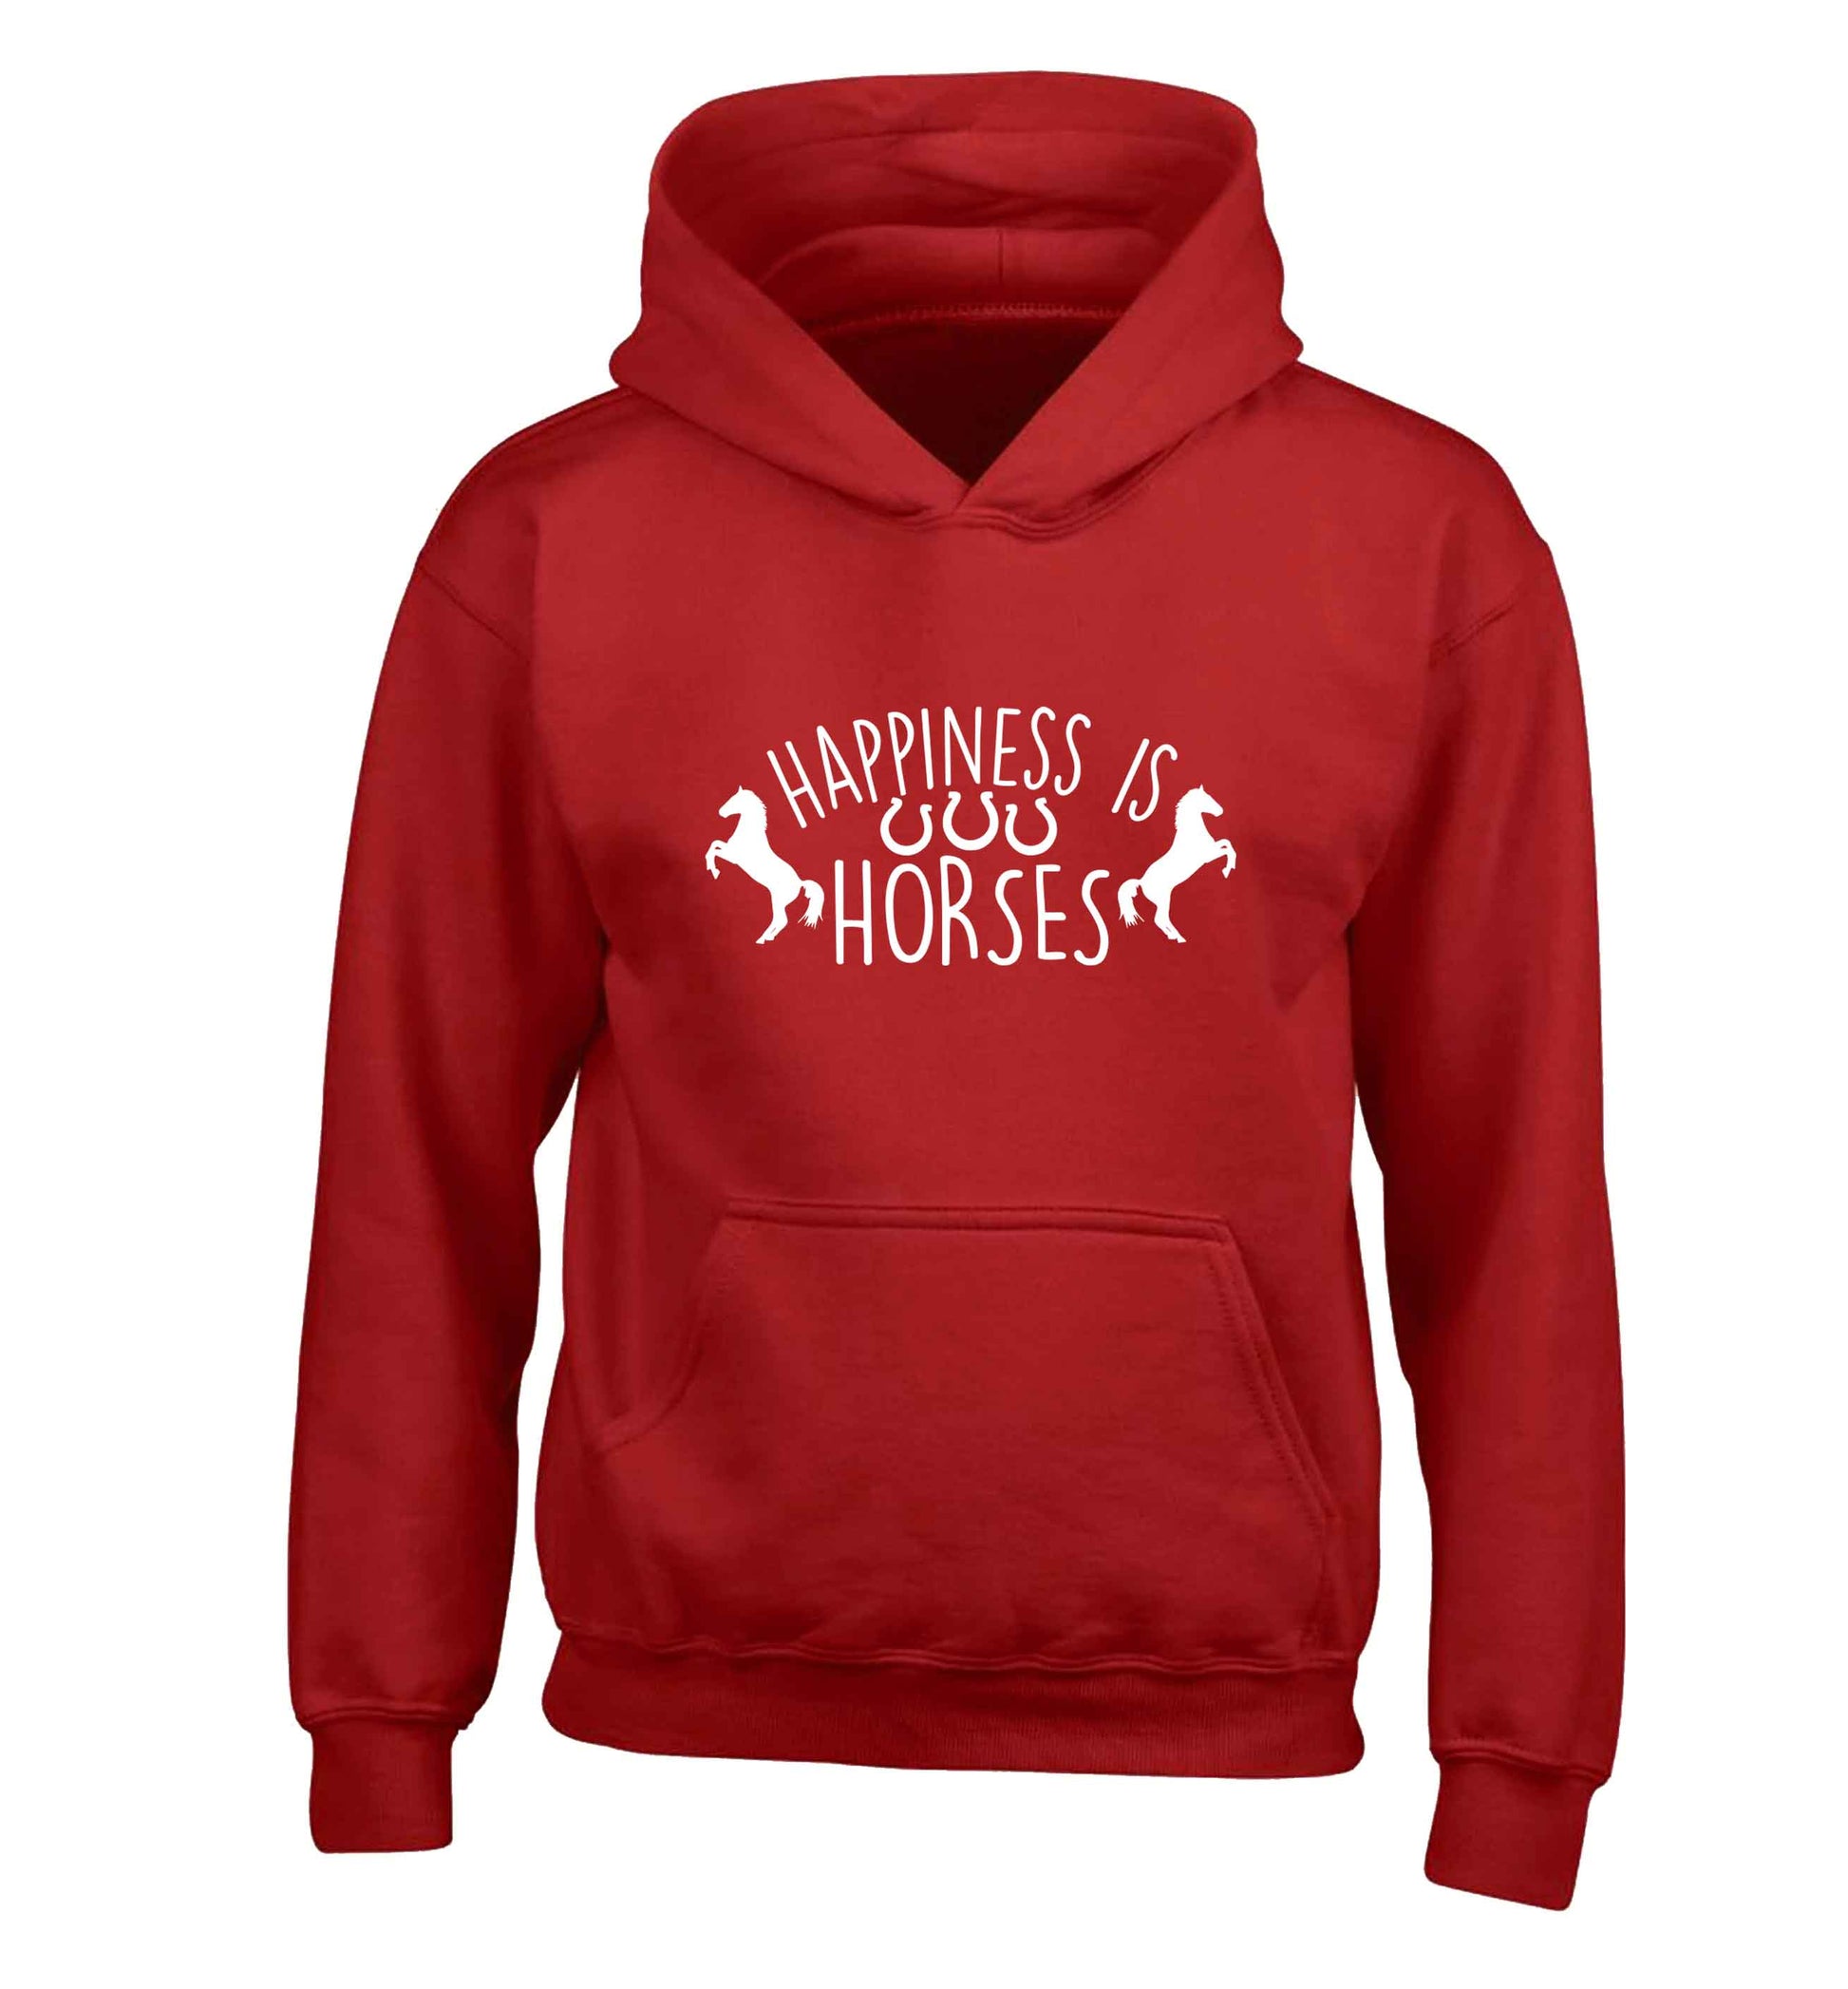 Happiness is horses children's red hoodie 12-13 Years